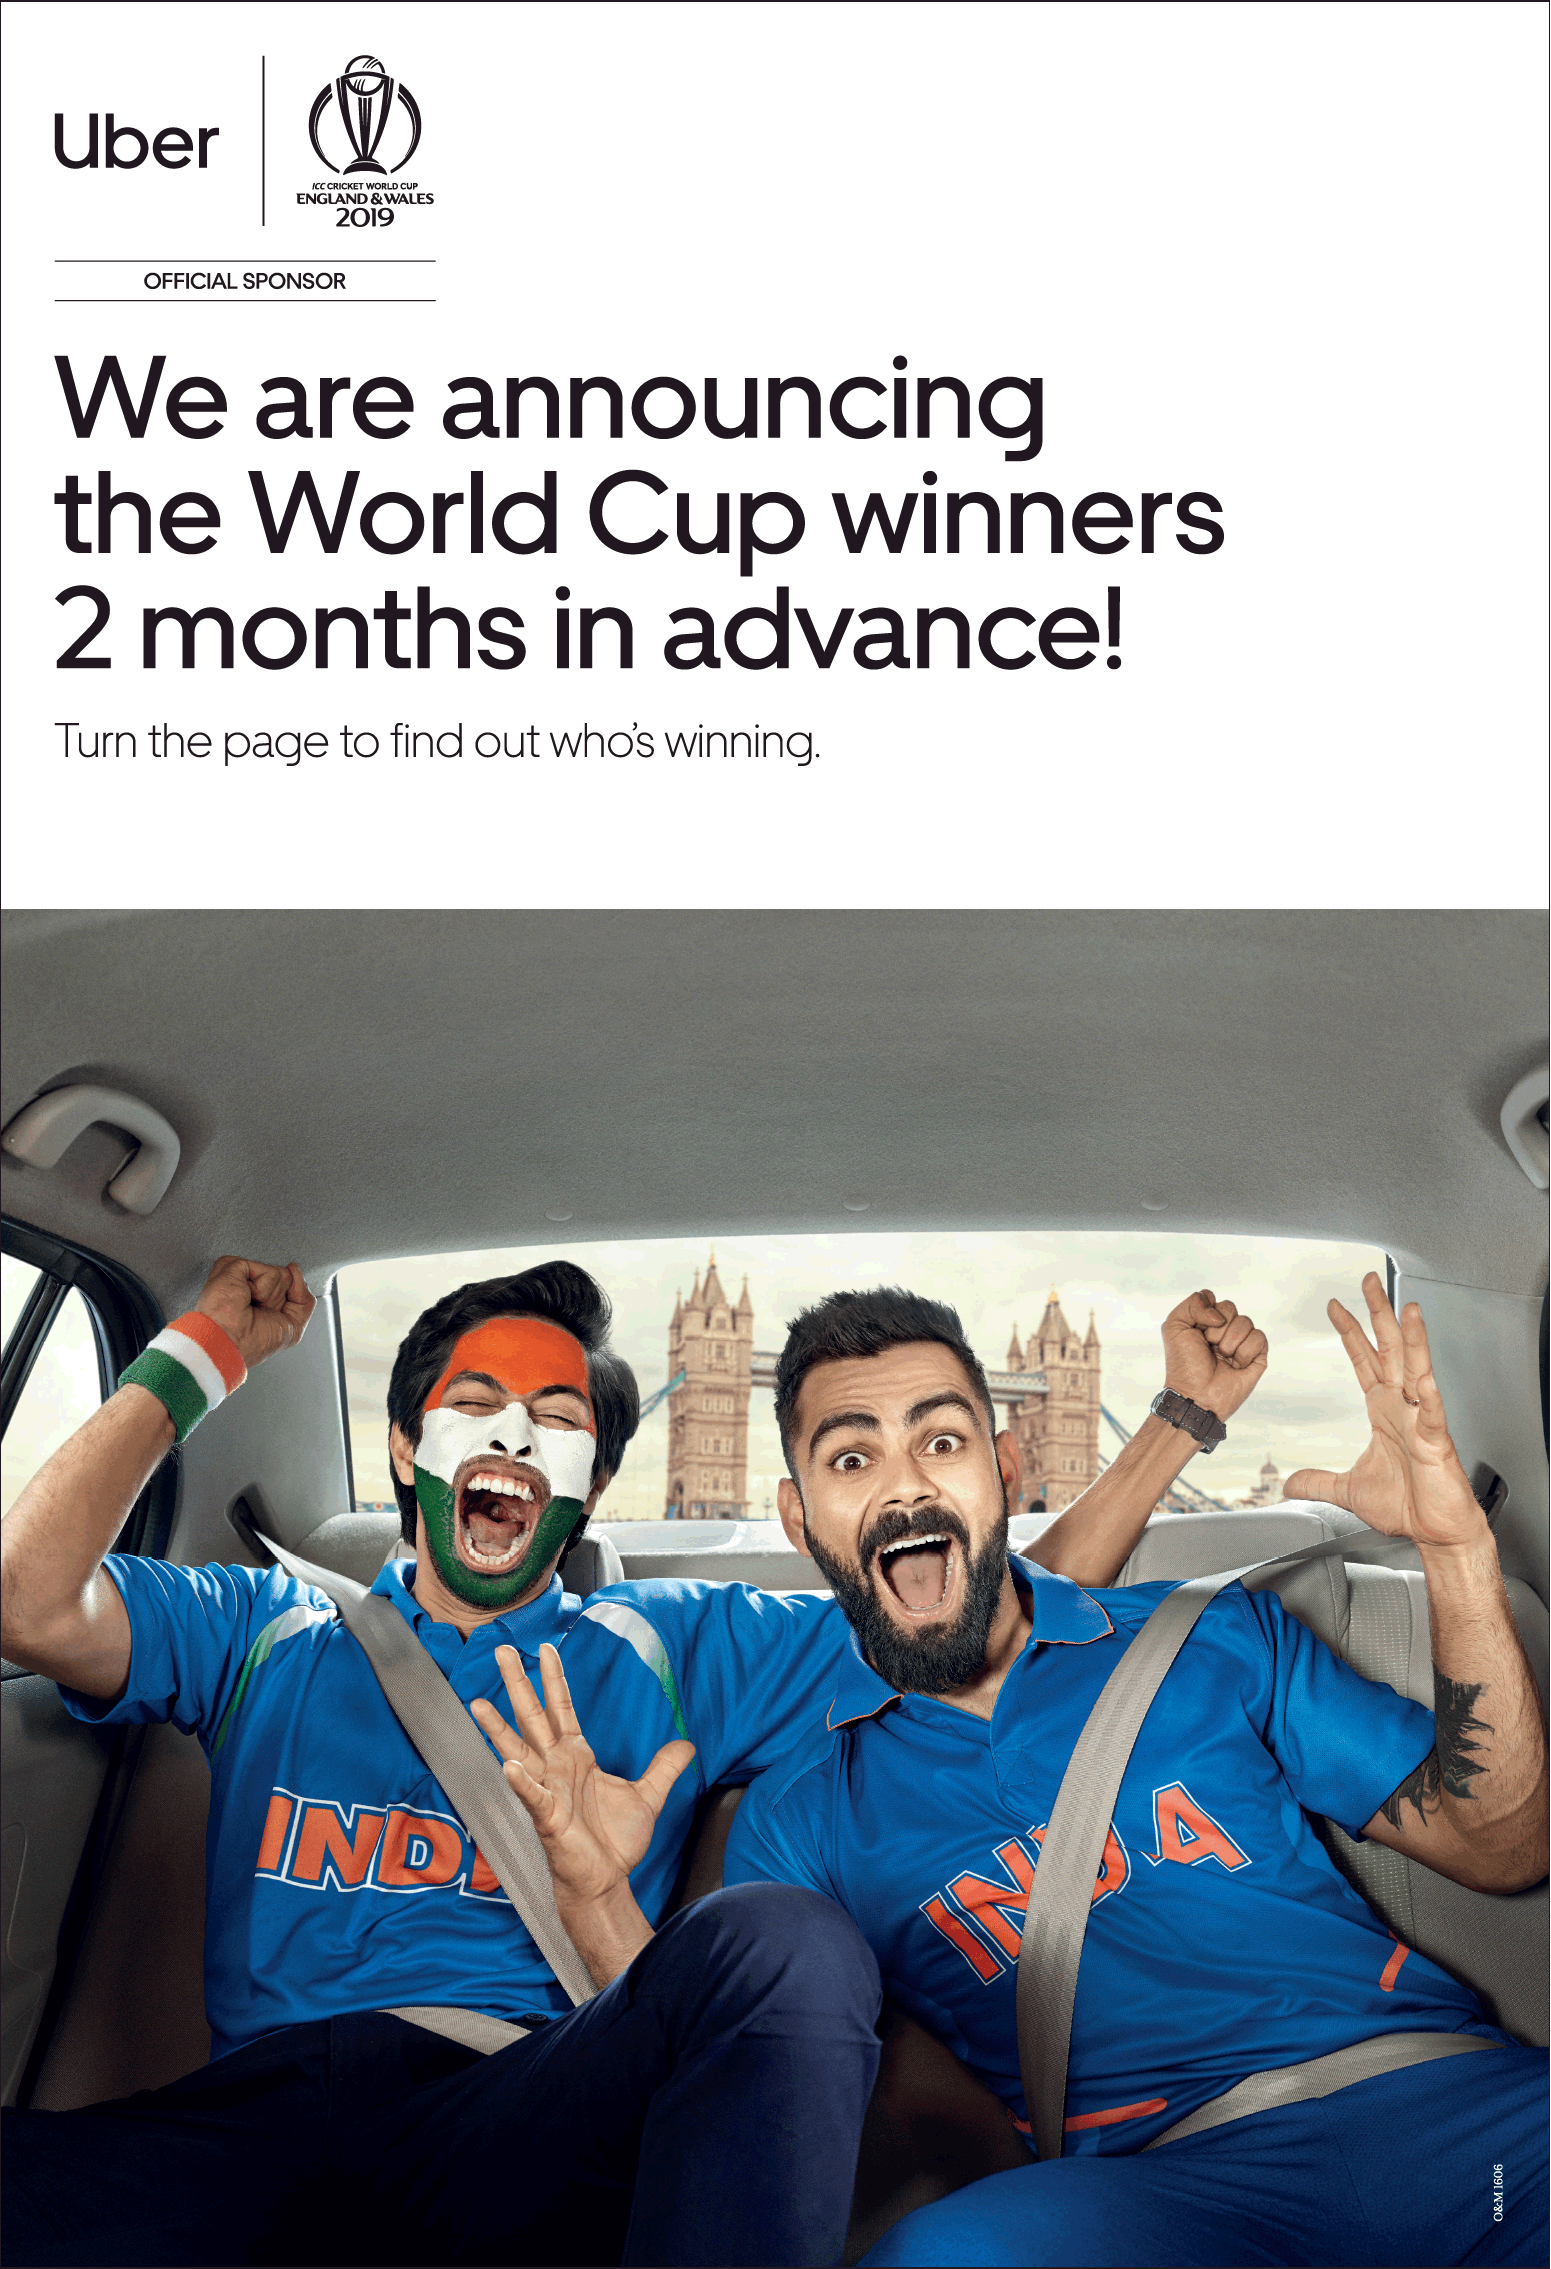 uber-we-are-announcing-the-world-xup-winners-2-months-in-advance-ad-times-of-india-delhi-14-05-2019.png